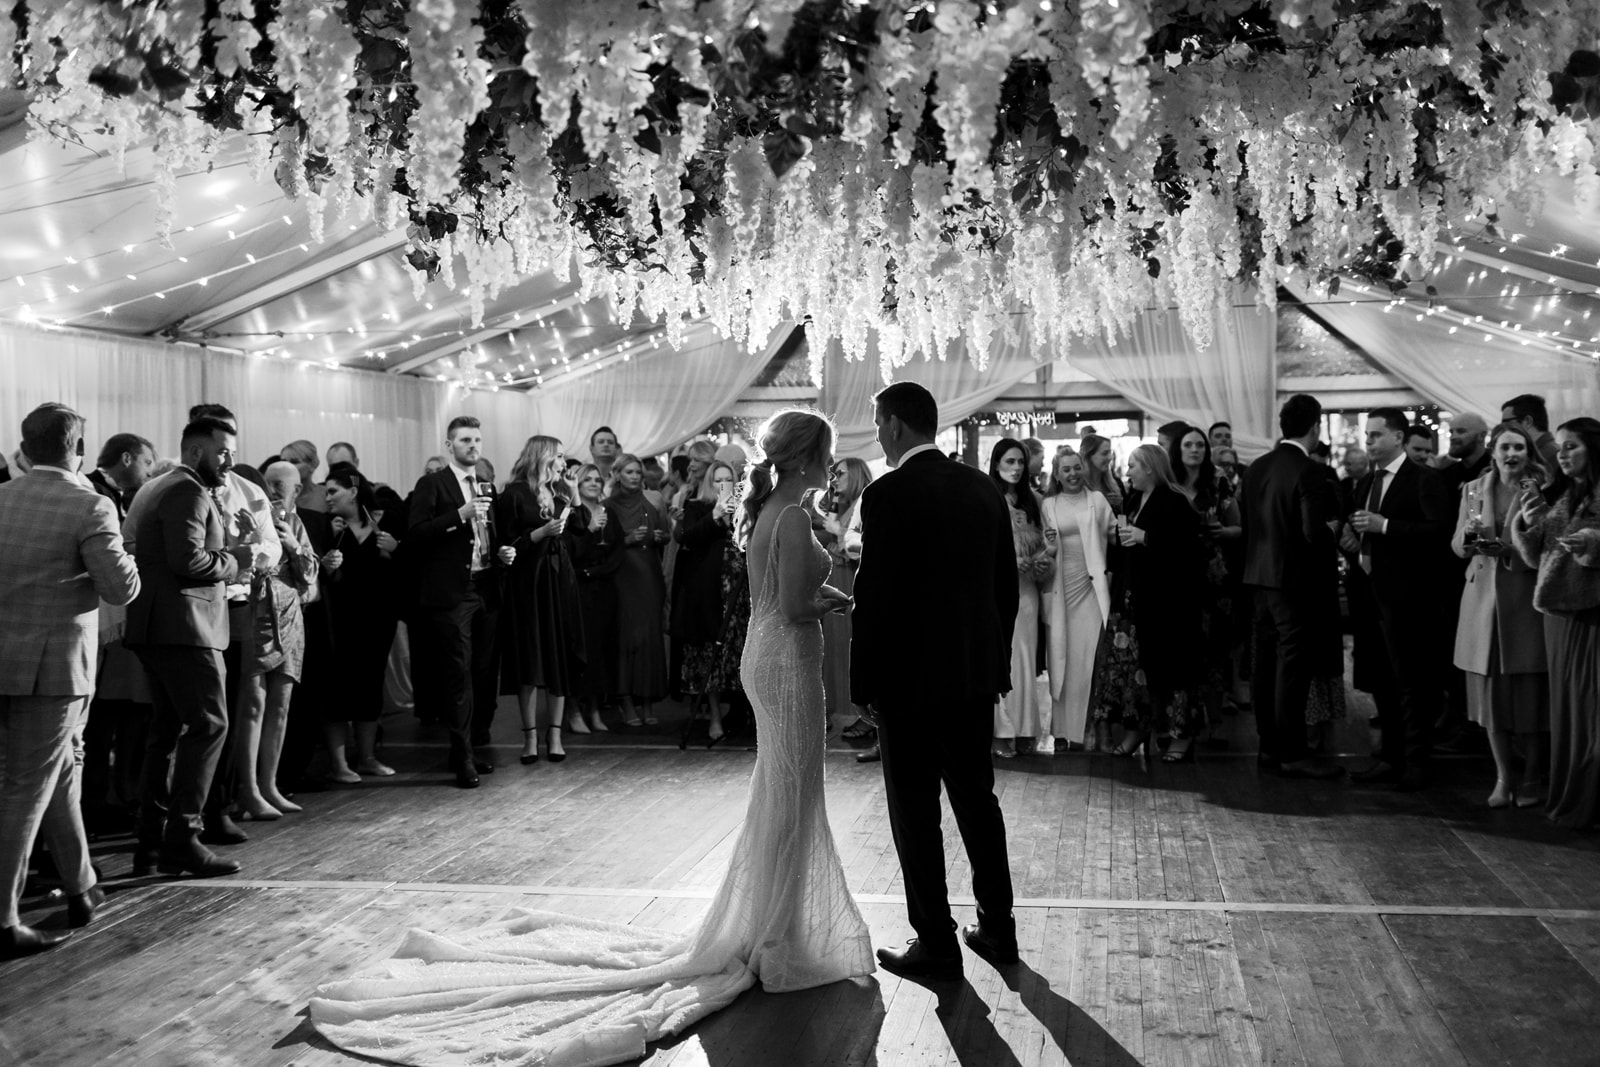 Bride and Groom's First Dance under Hocker Marquee on Integrated Dancefloor with Florals